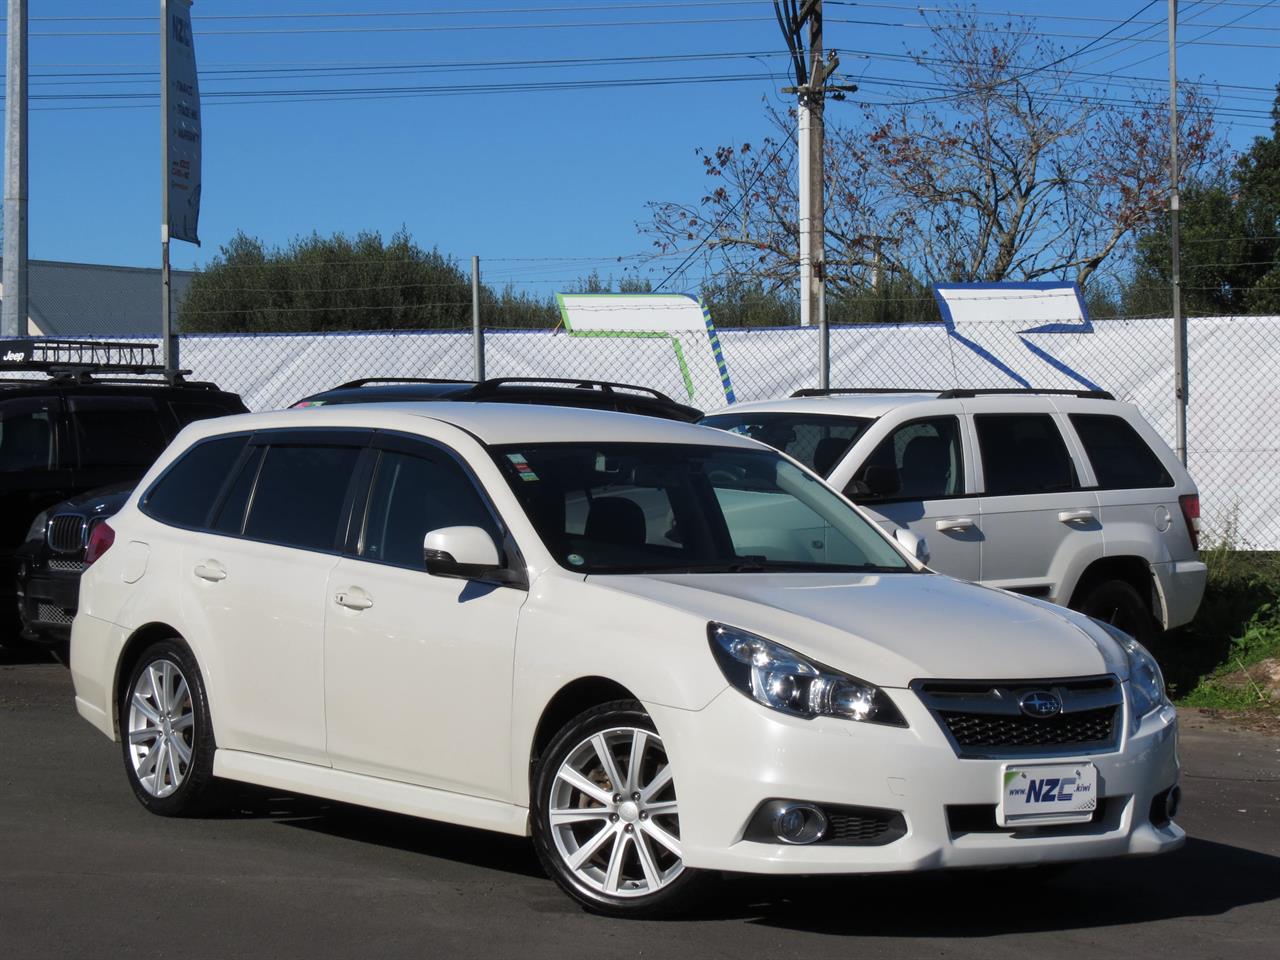 NZC 2012 Subaru Legacy just arrived to Auckland